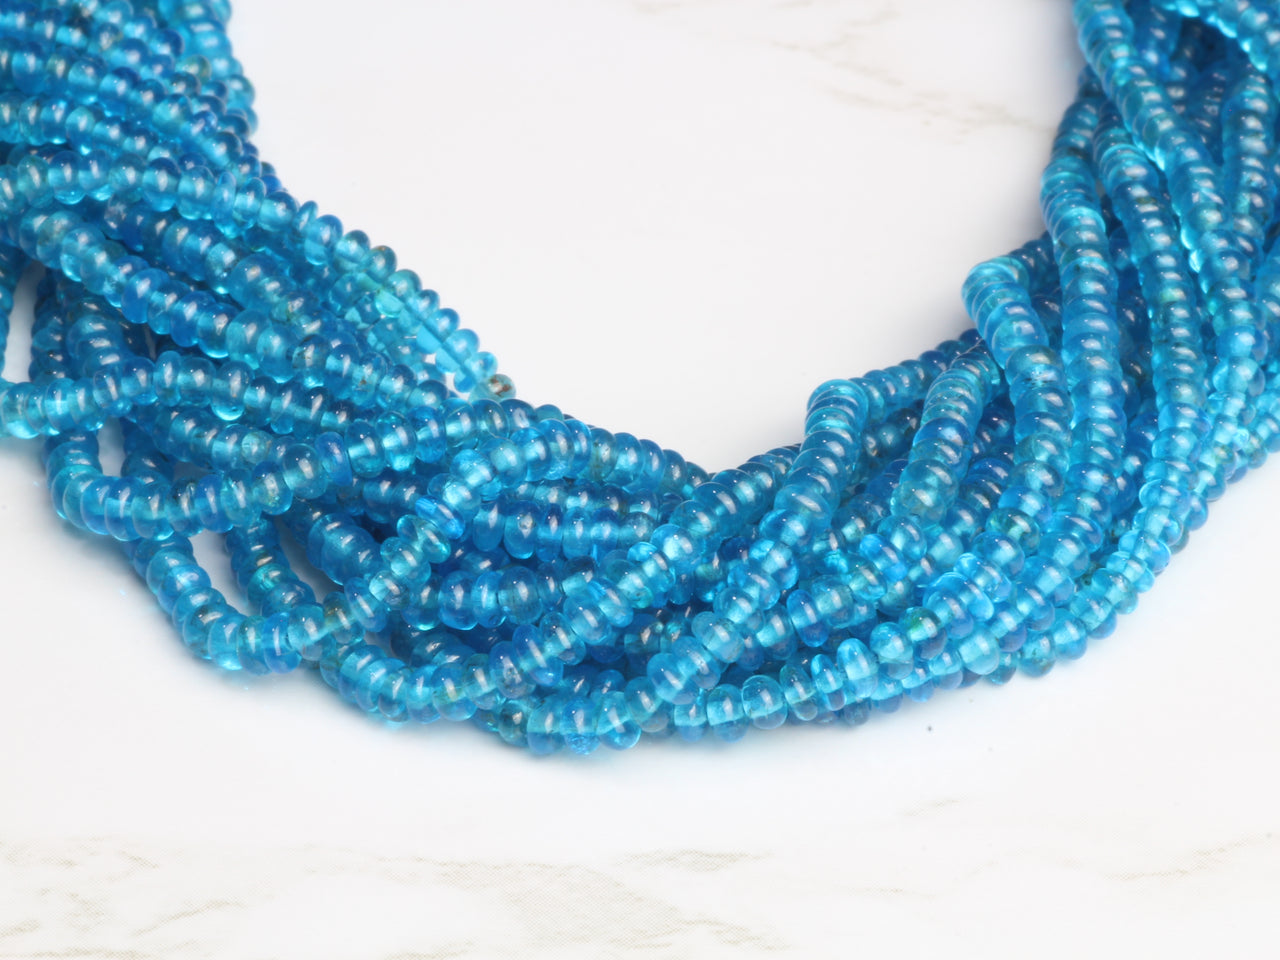 Neon Blue Apatite 3mm Smooth Rondelles